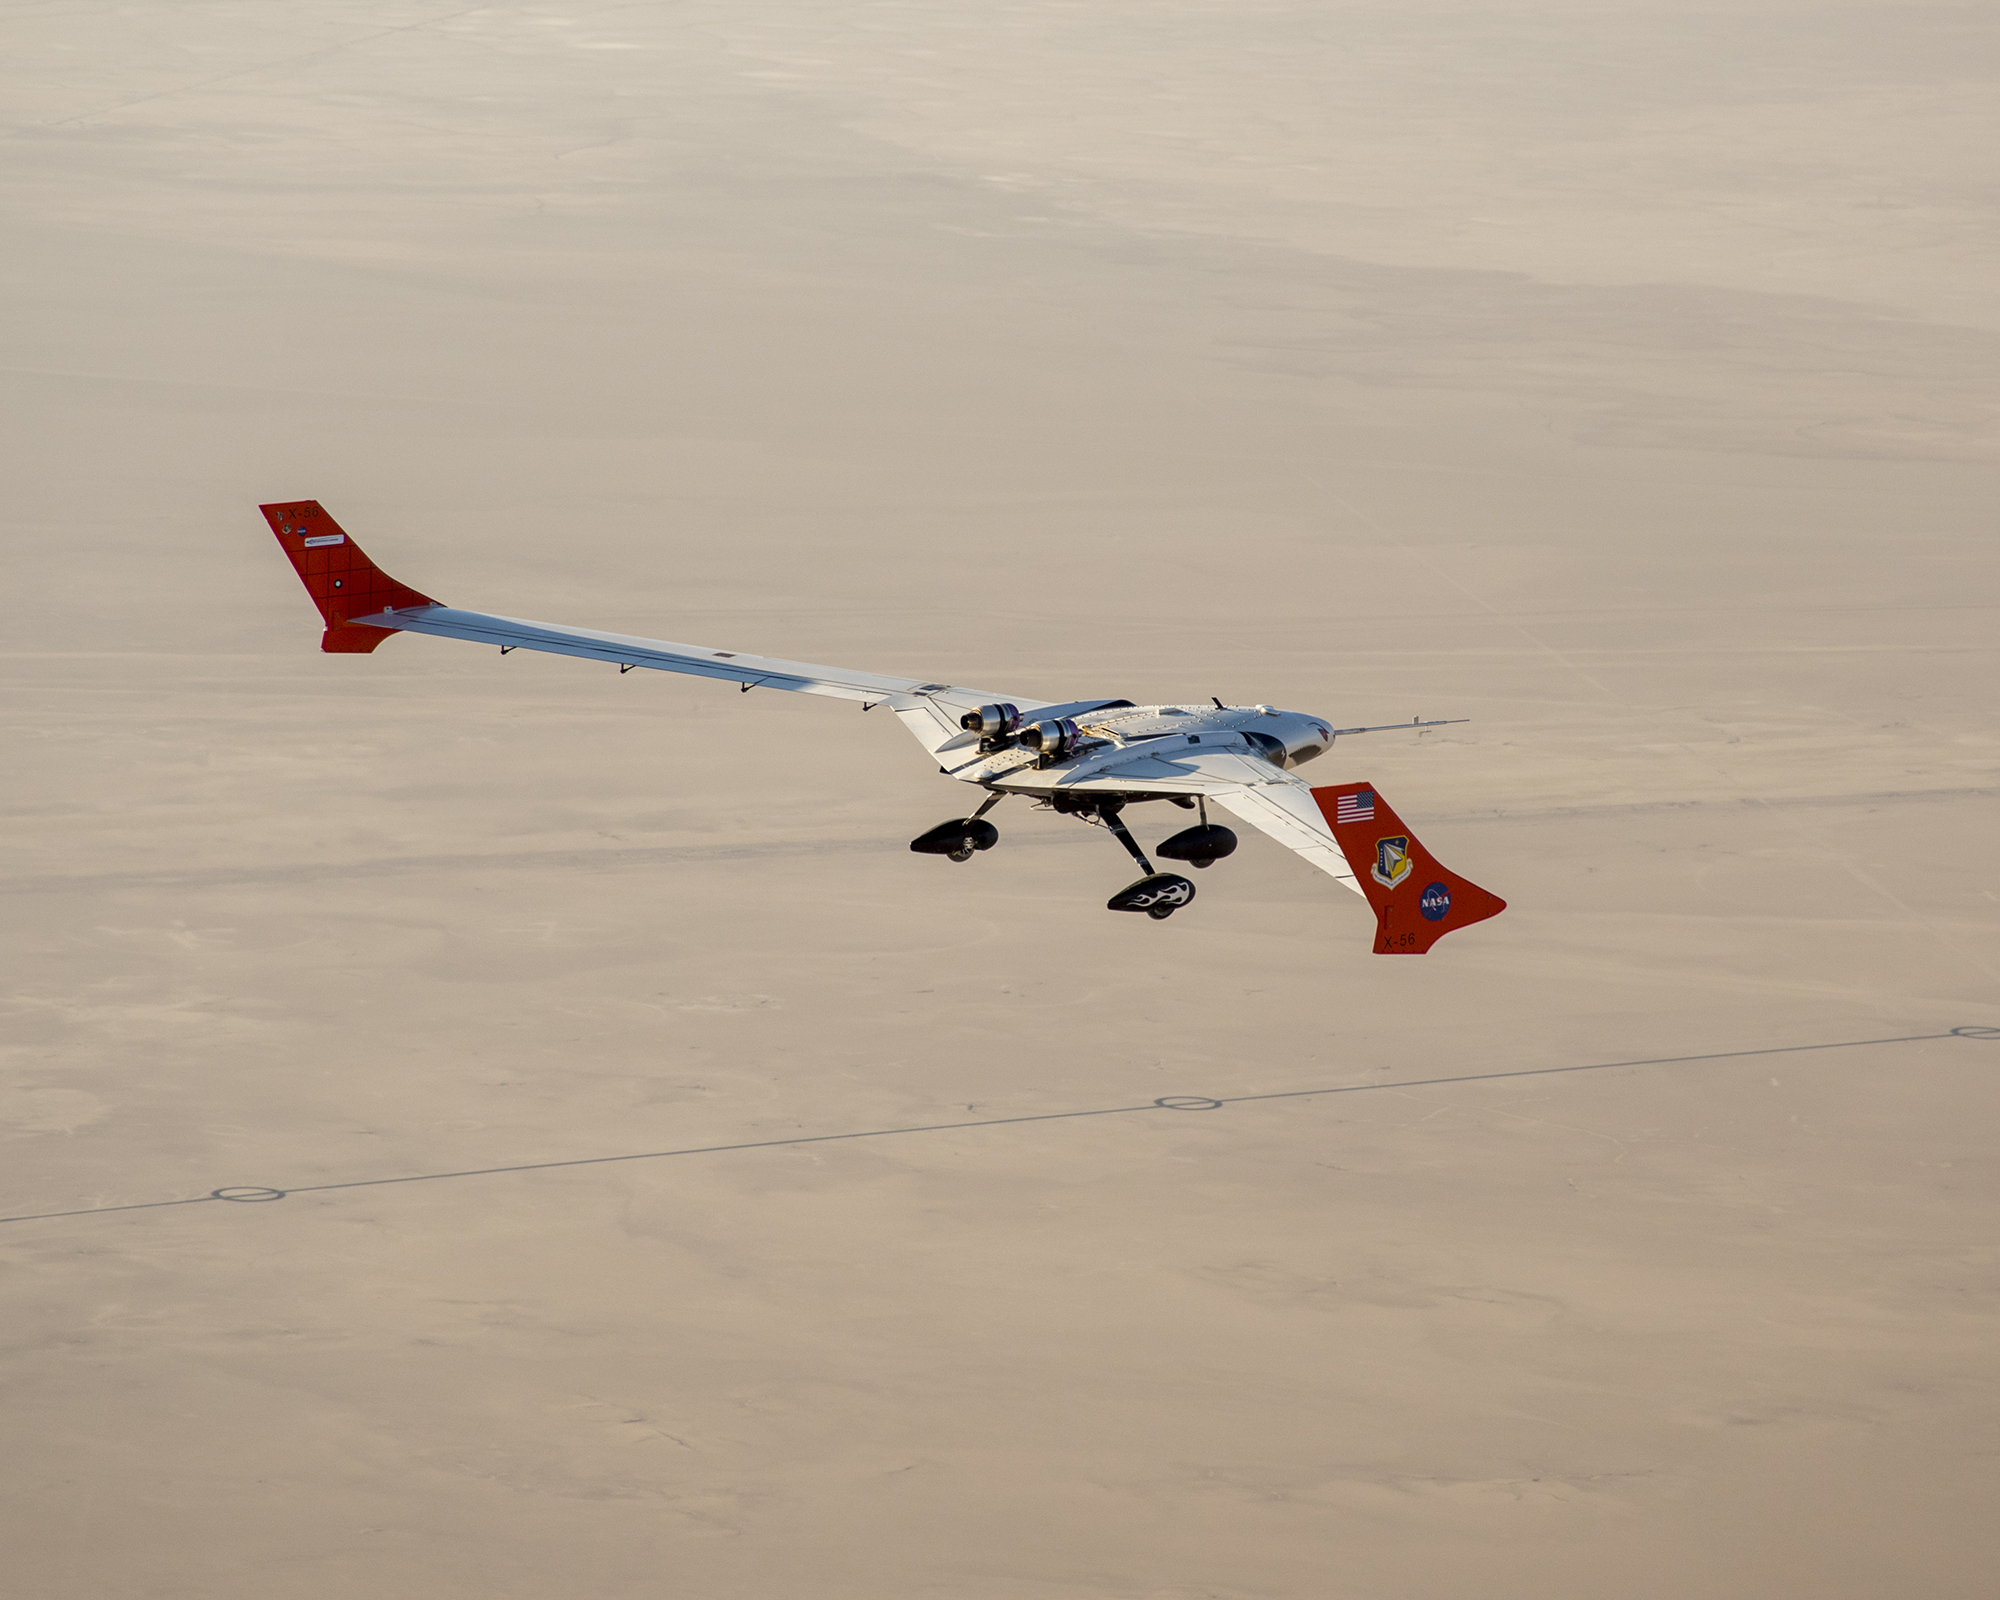 The X-56A flies a research flight in the skies above Edwards Air Force Base.